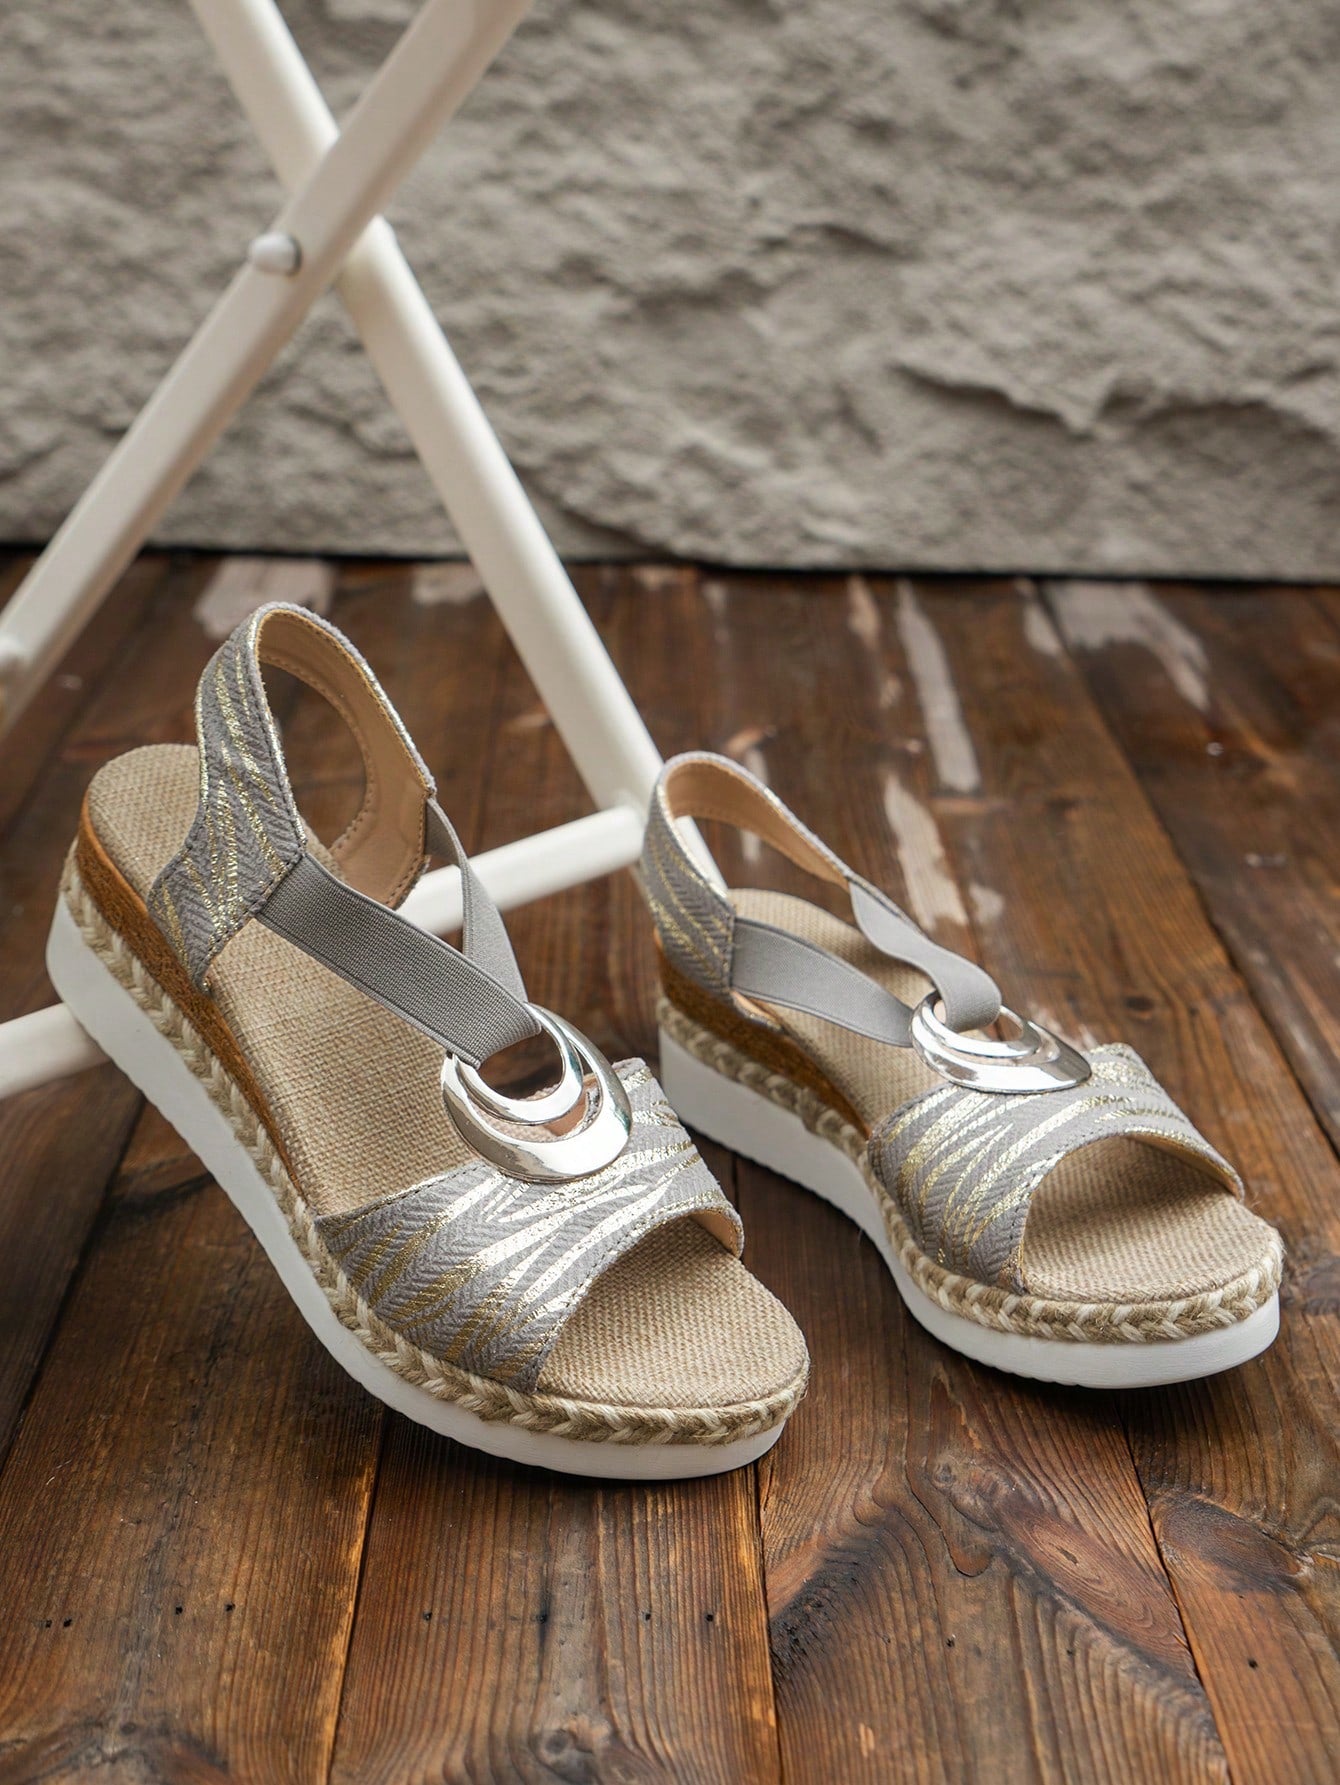 Women's Comfortable Soft Bottom Wedge Sandals With Thick Platform For Summer